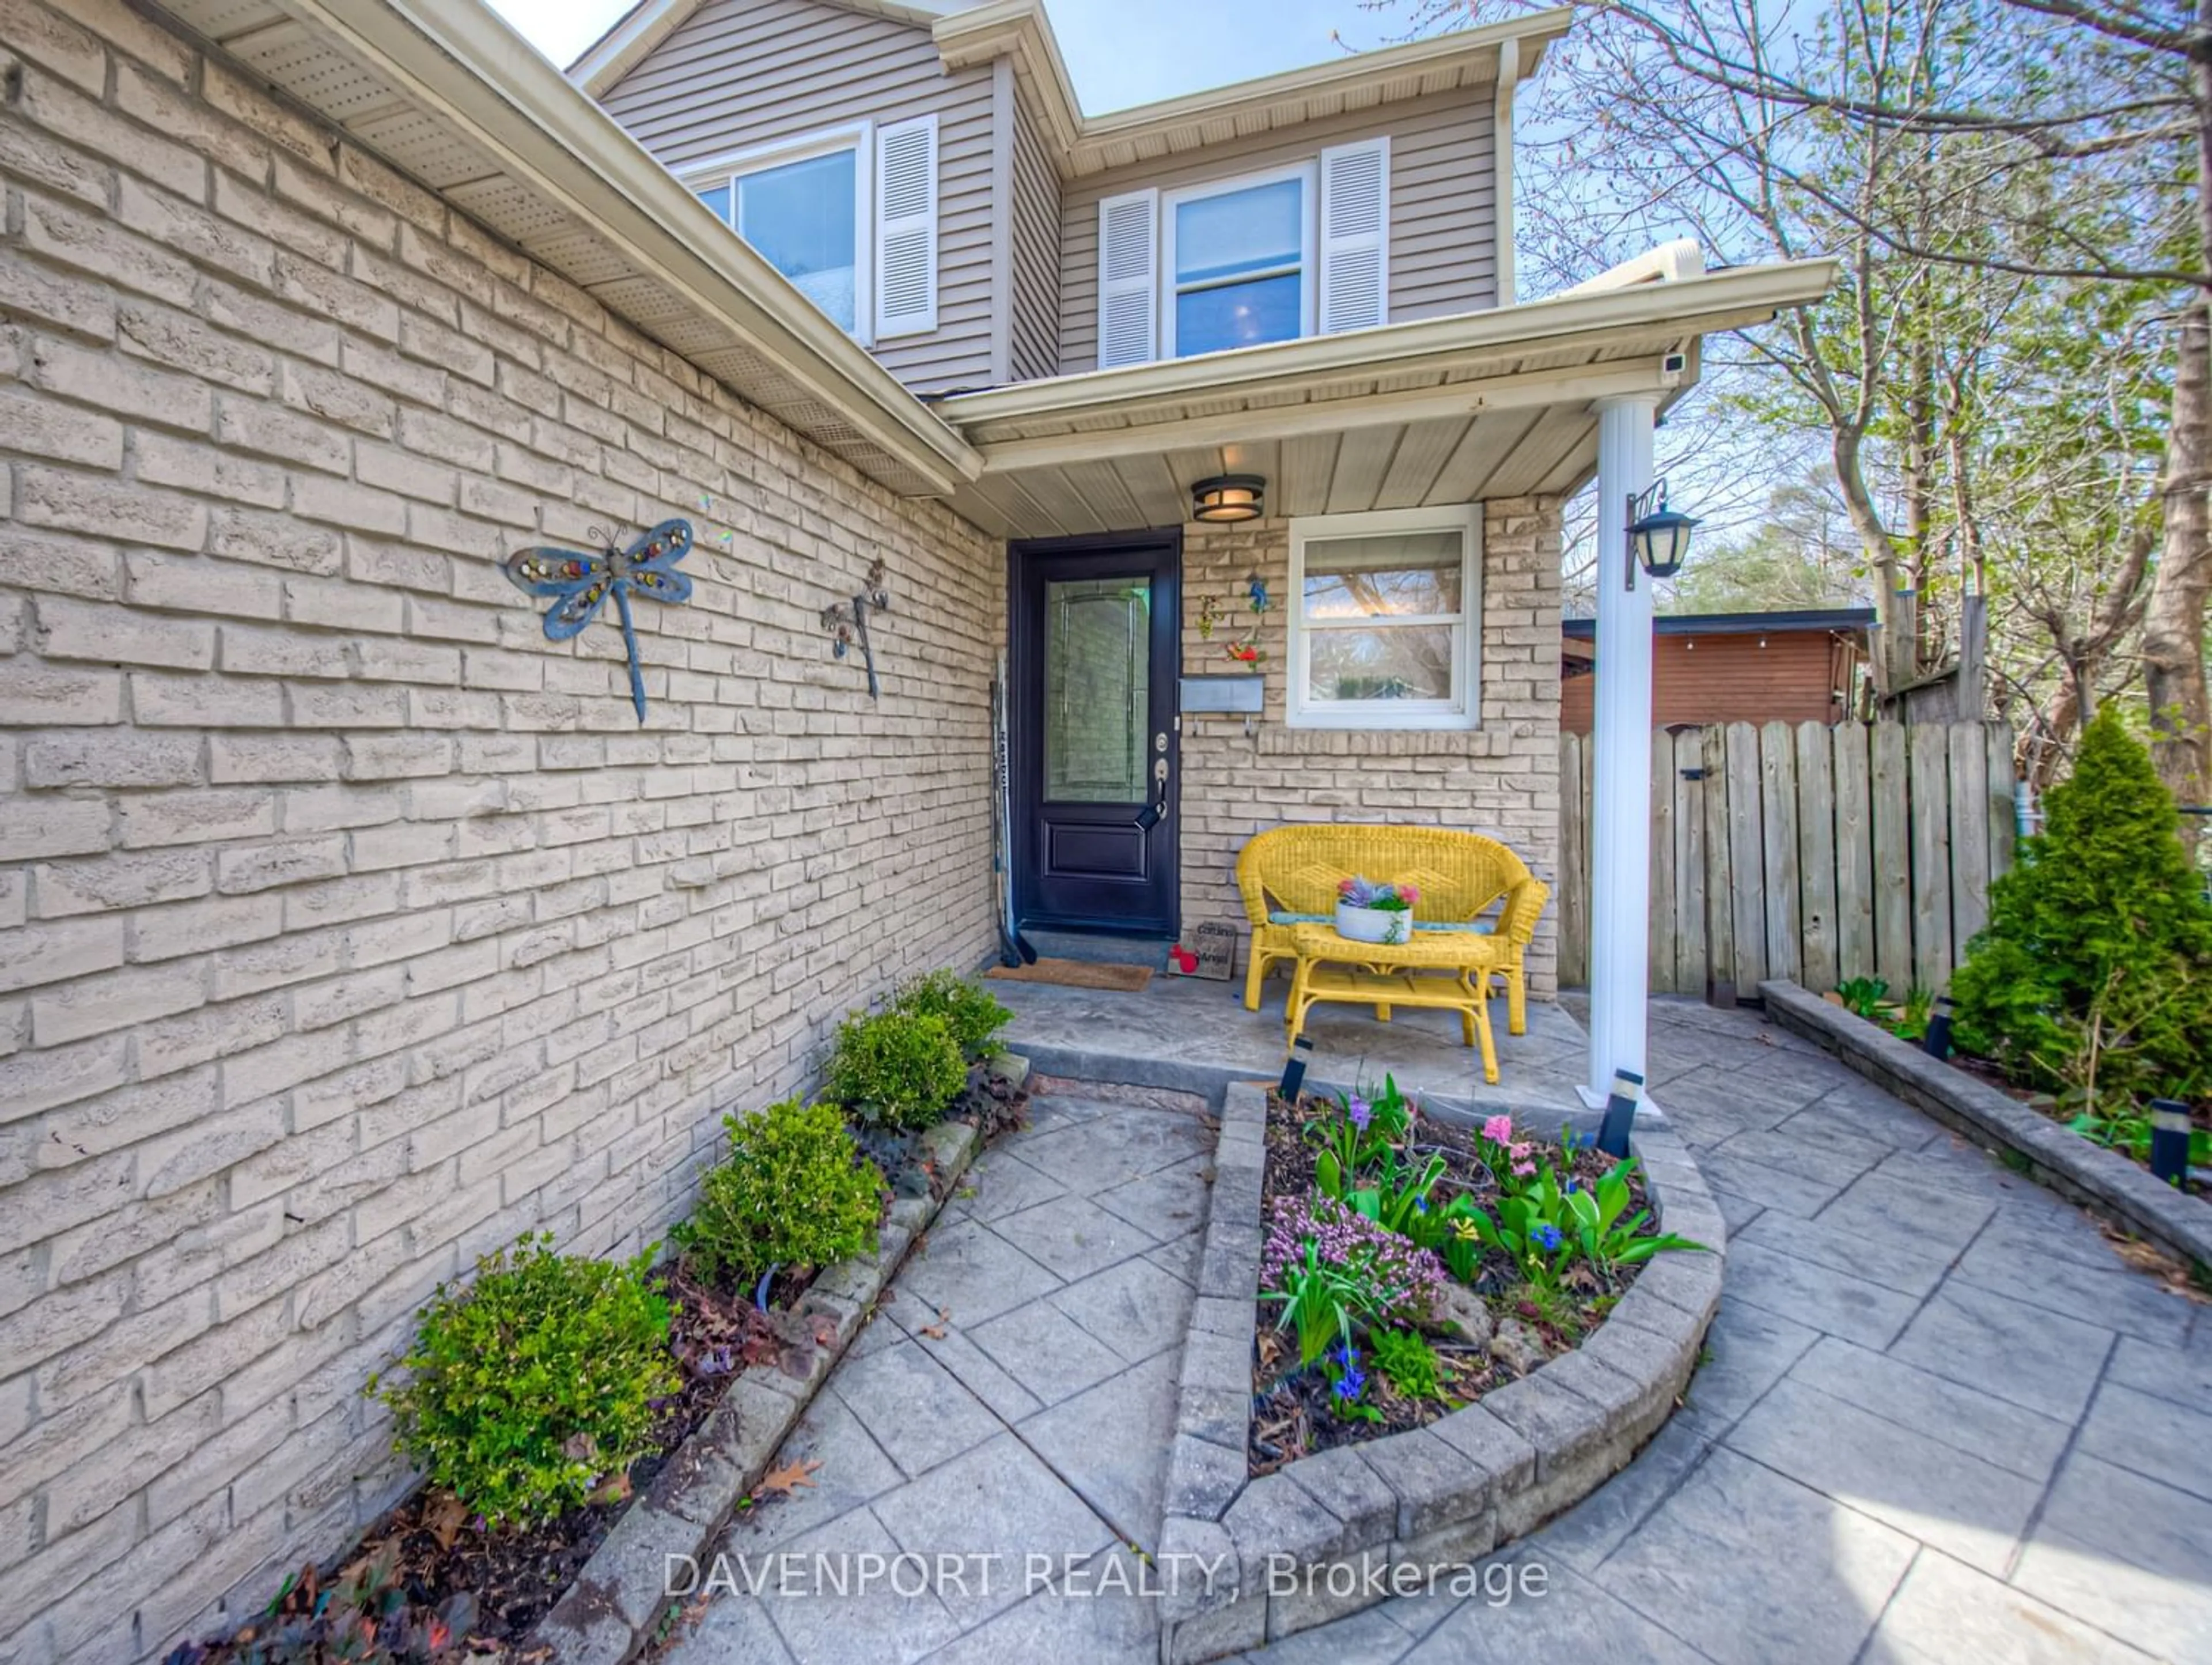 Home with brick exterior material for 2681 Romark Mews, Mississauga Ontario L5L 2Z4